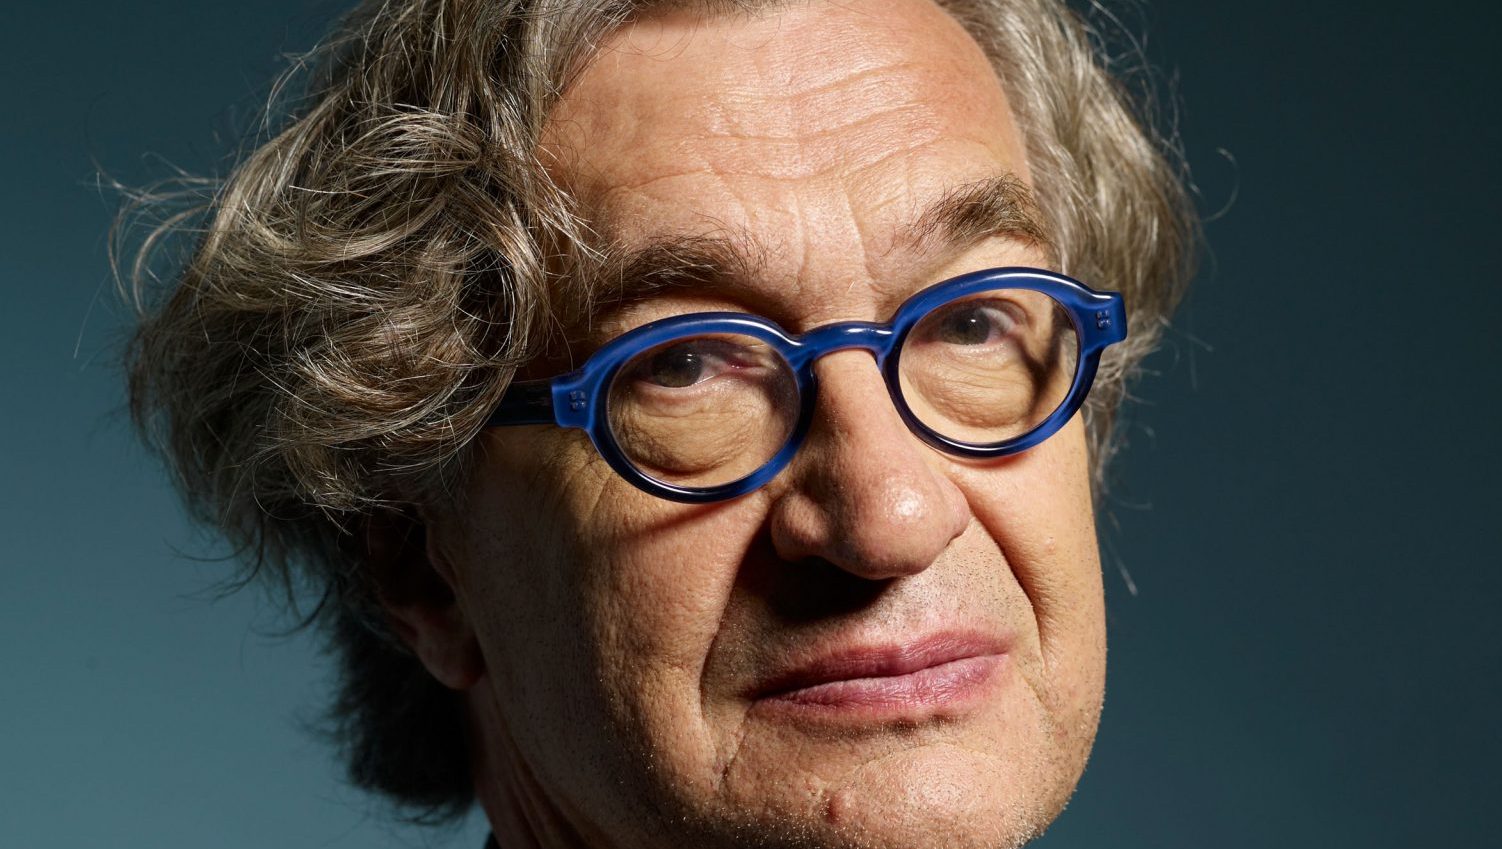 Wim Wenders poses for a portrait during the 2011 Toronto Film Festival. Photo: Matt Carr/Getty